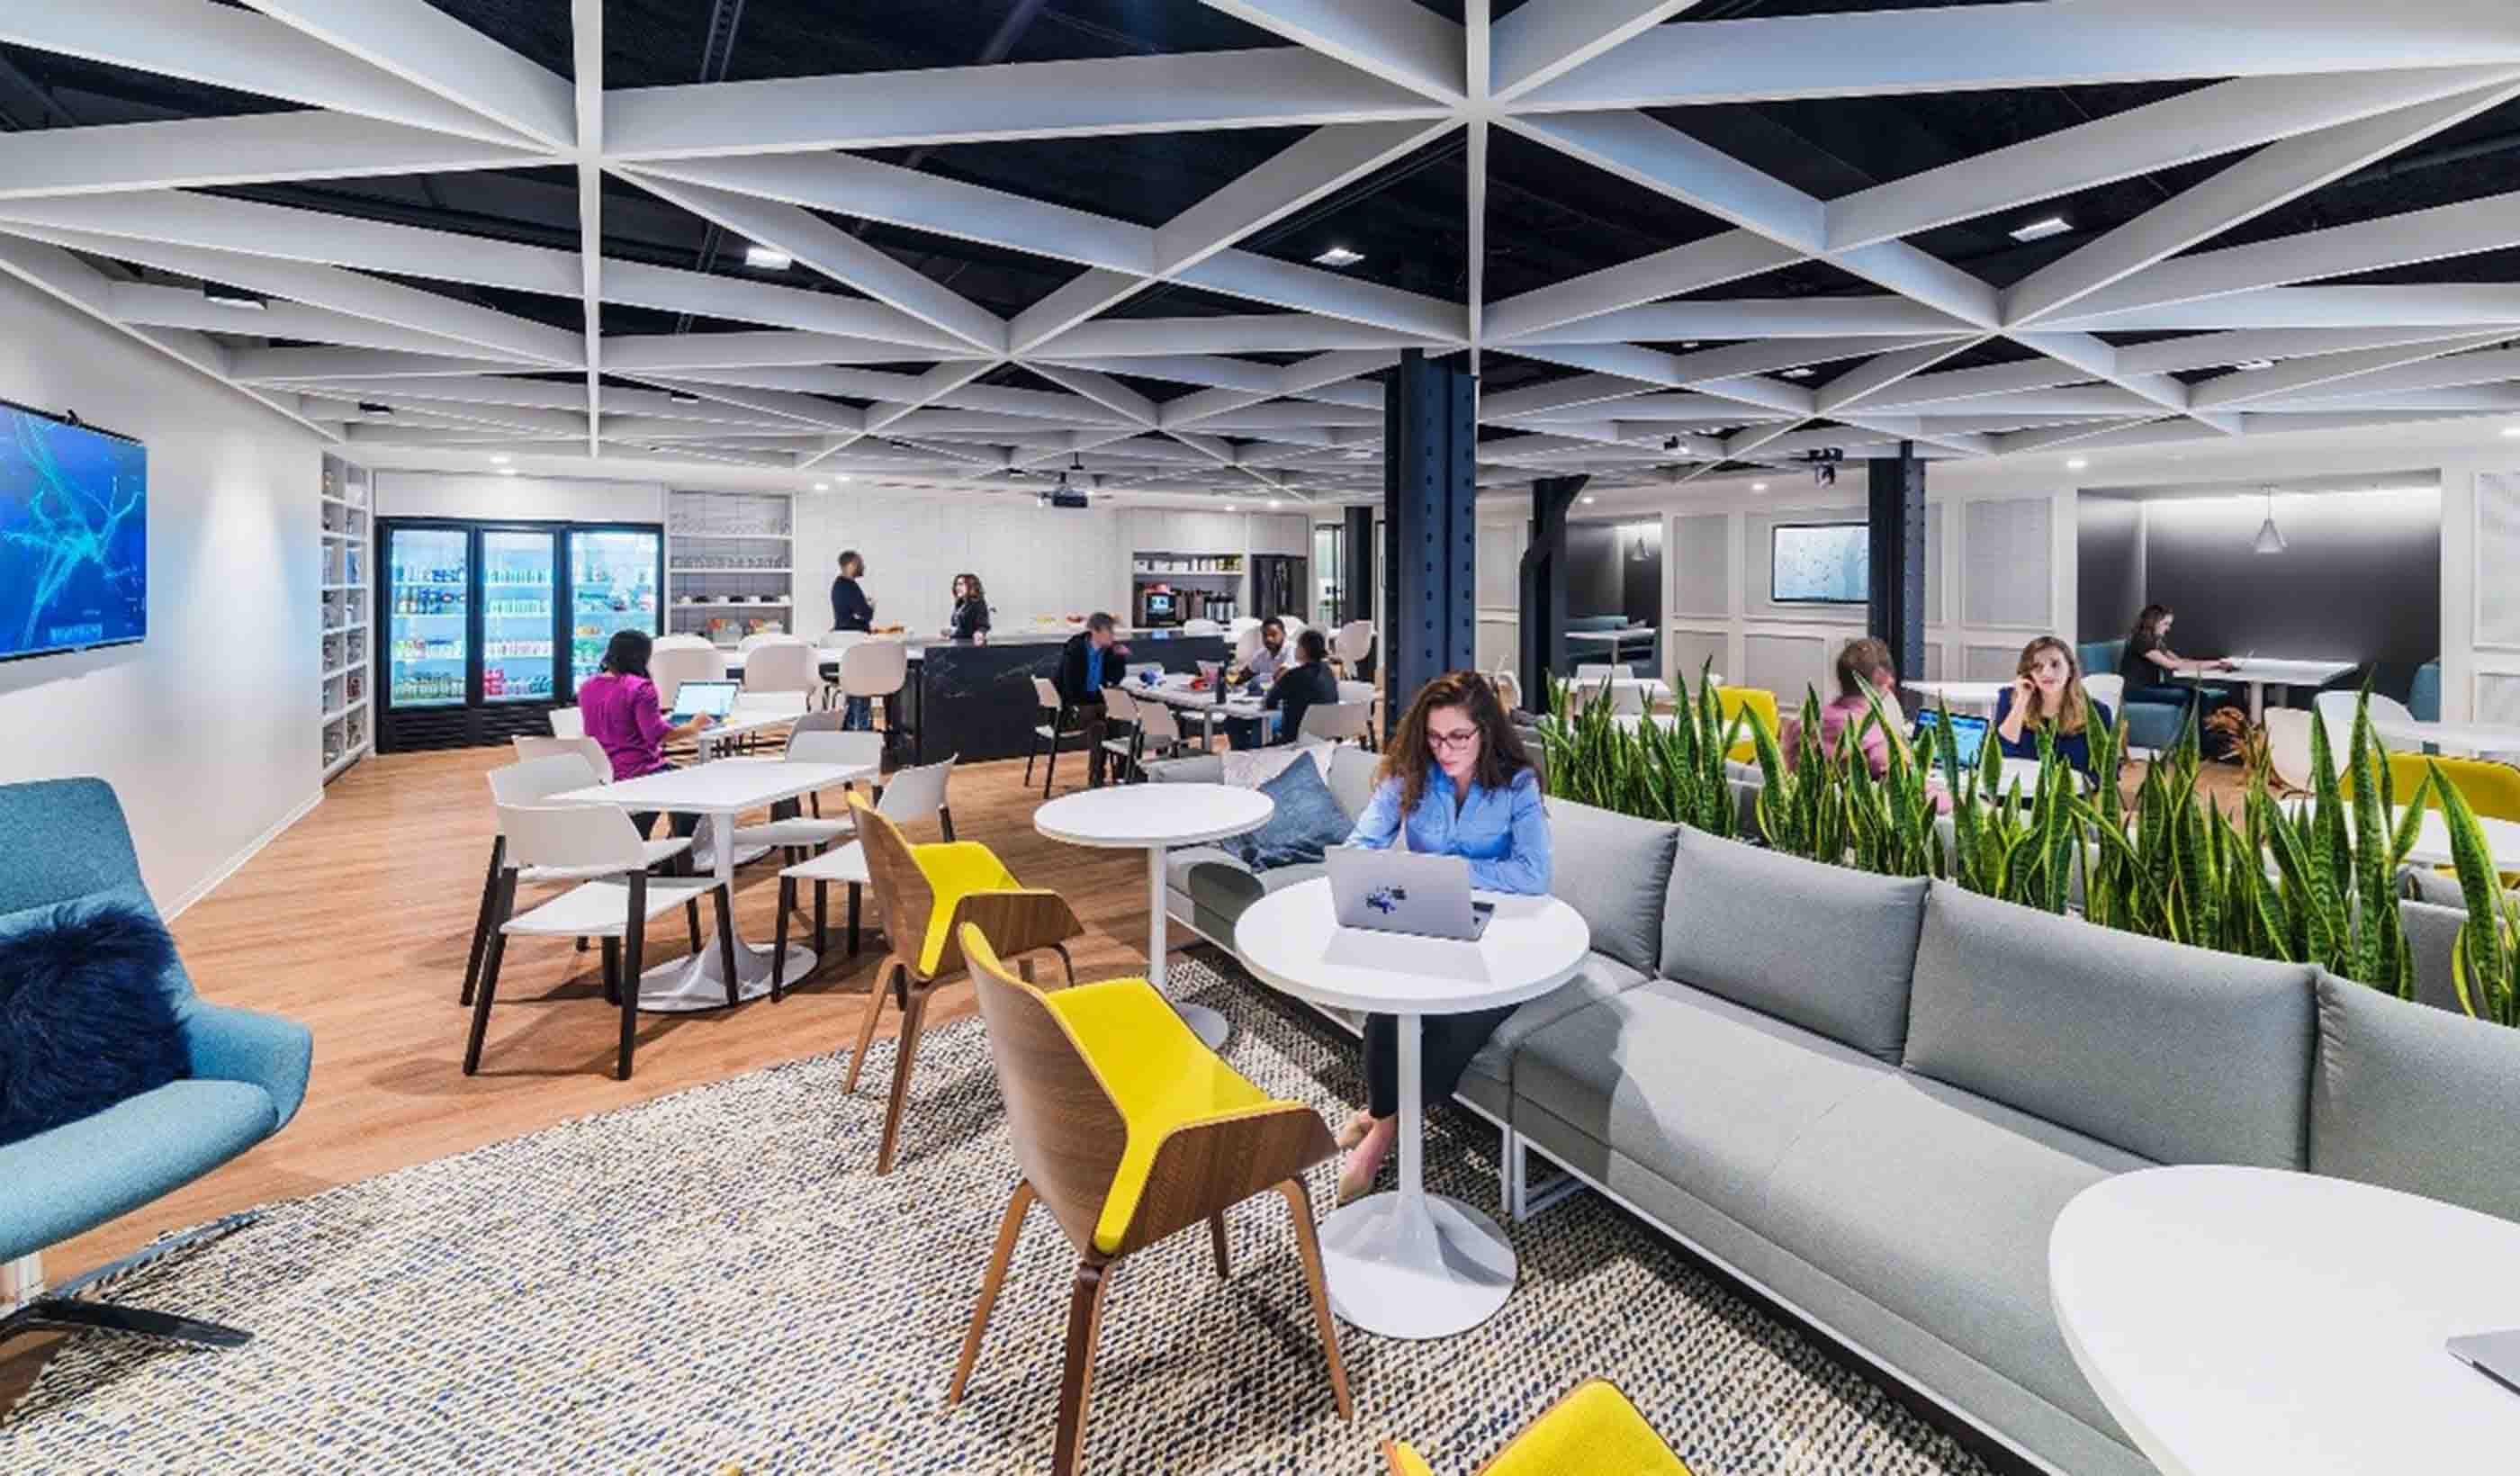 From the Design Quarterly: Culture 2.0 in the workplace